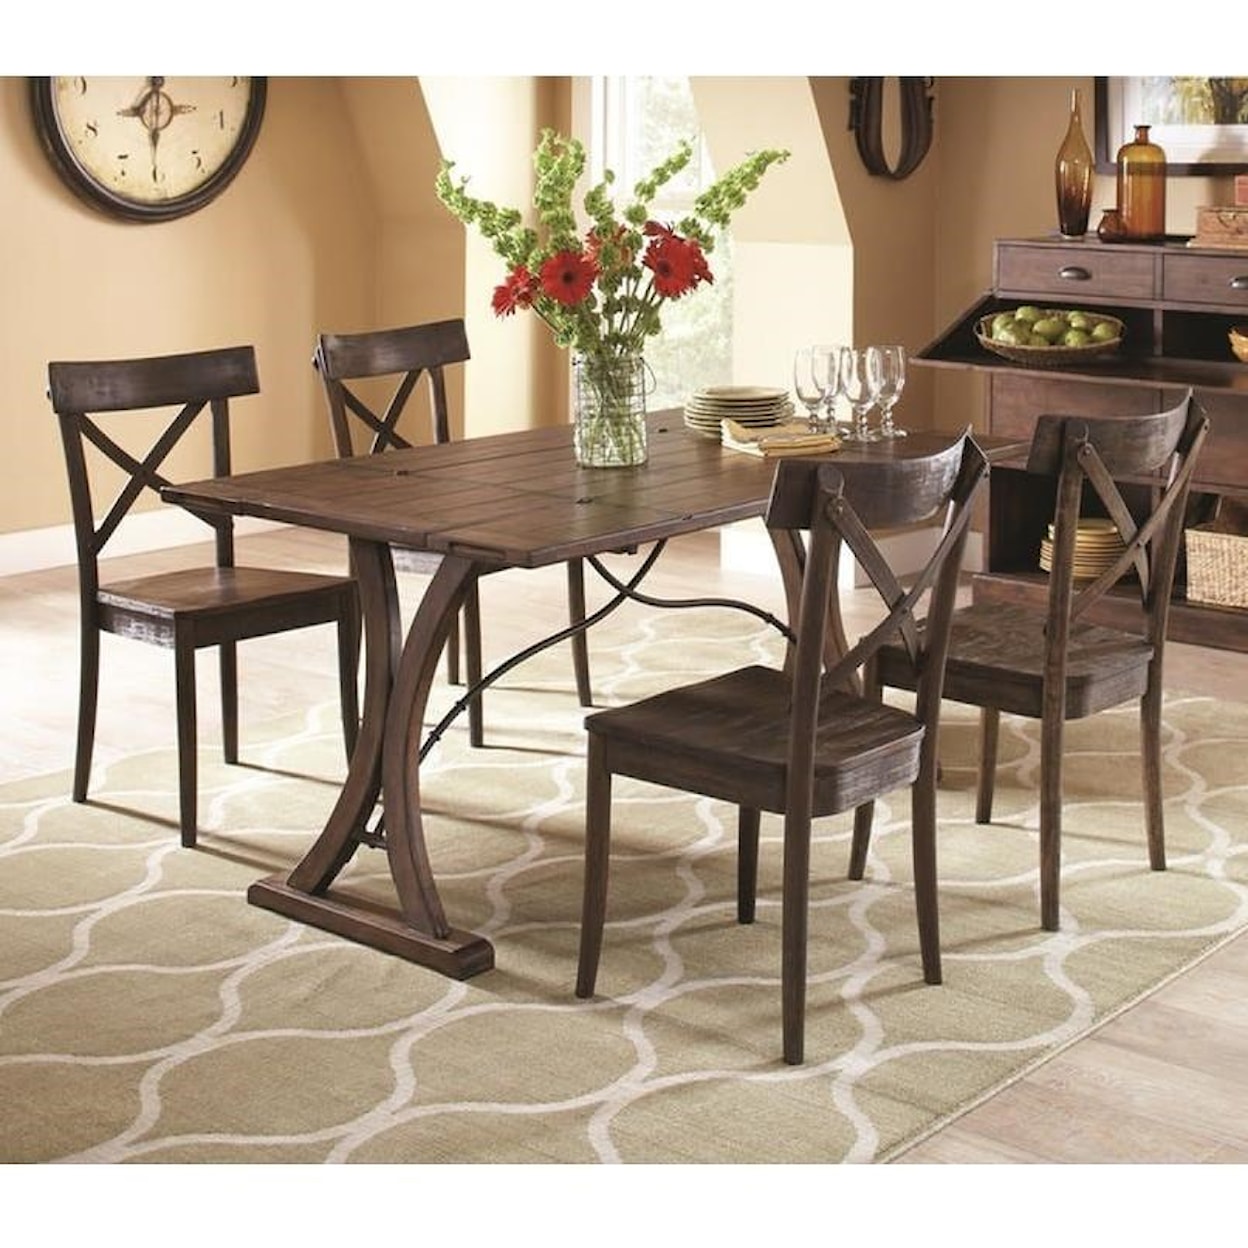 Elements New Bedford 5-Piece Dining Set